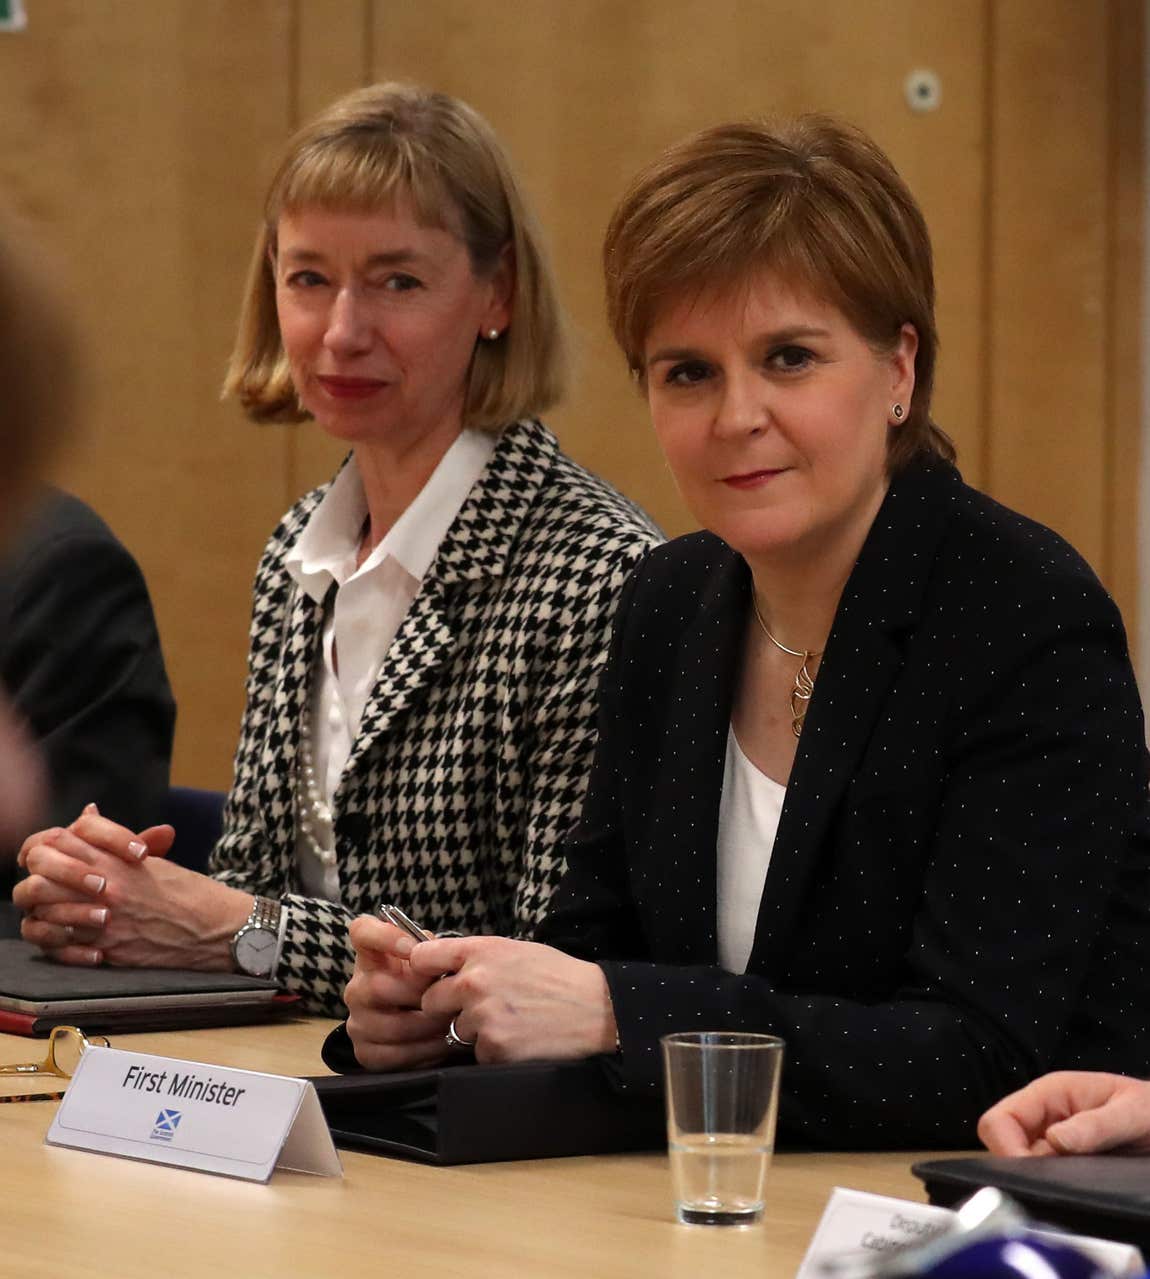 Nicola Sturgeon will make the final decision on who replaces Leslie Evans (left) (Andrew Milligan/PA)